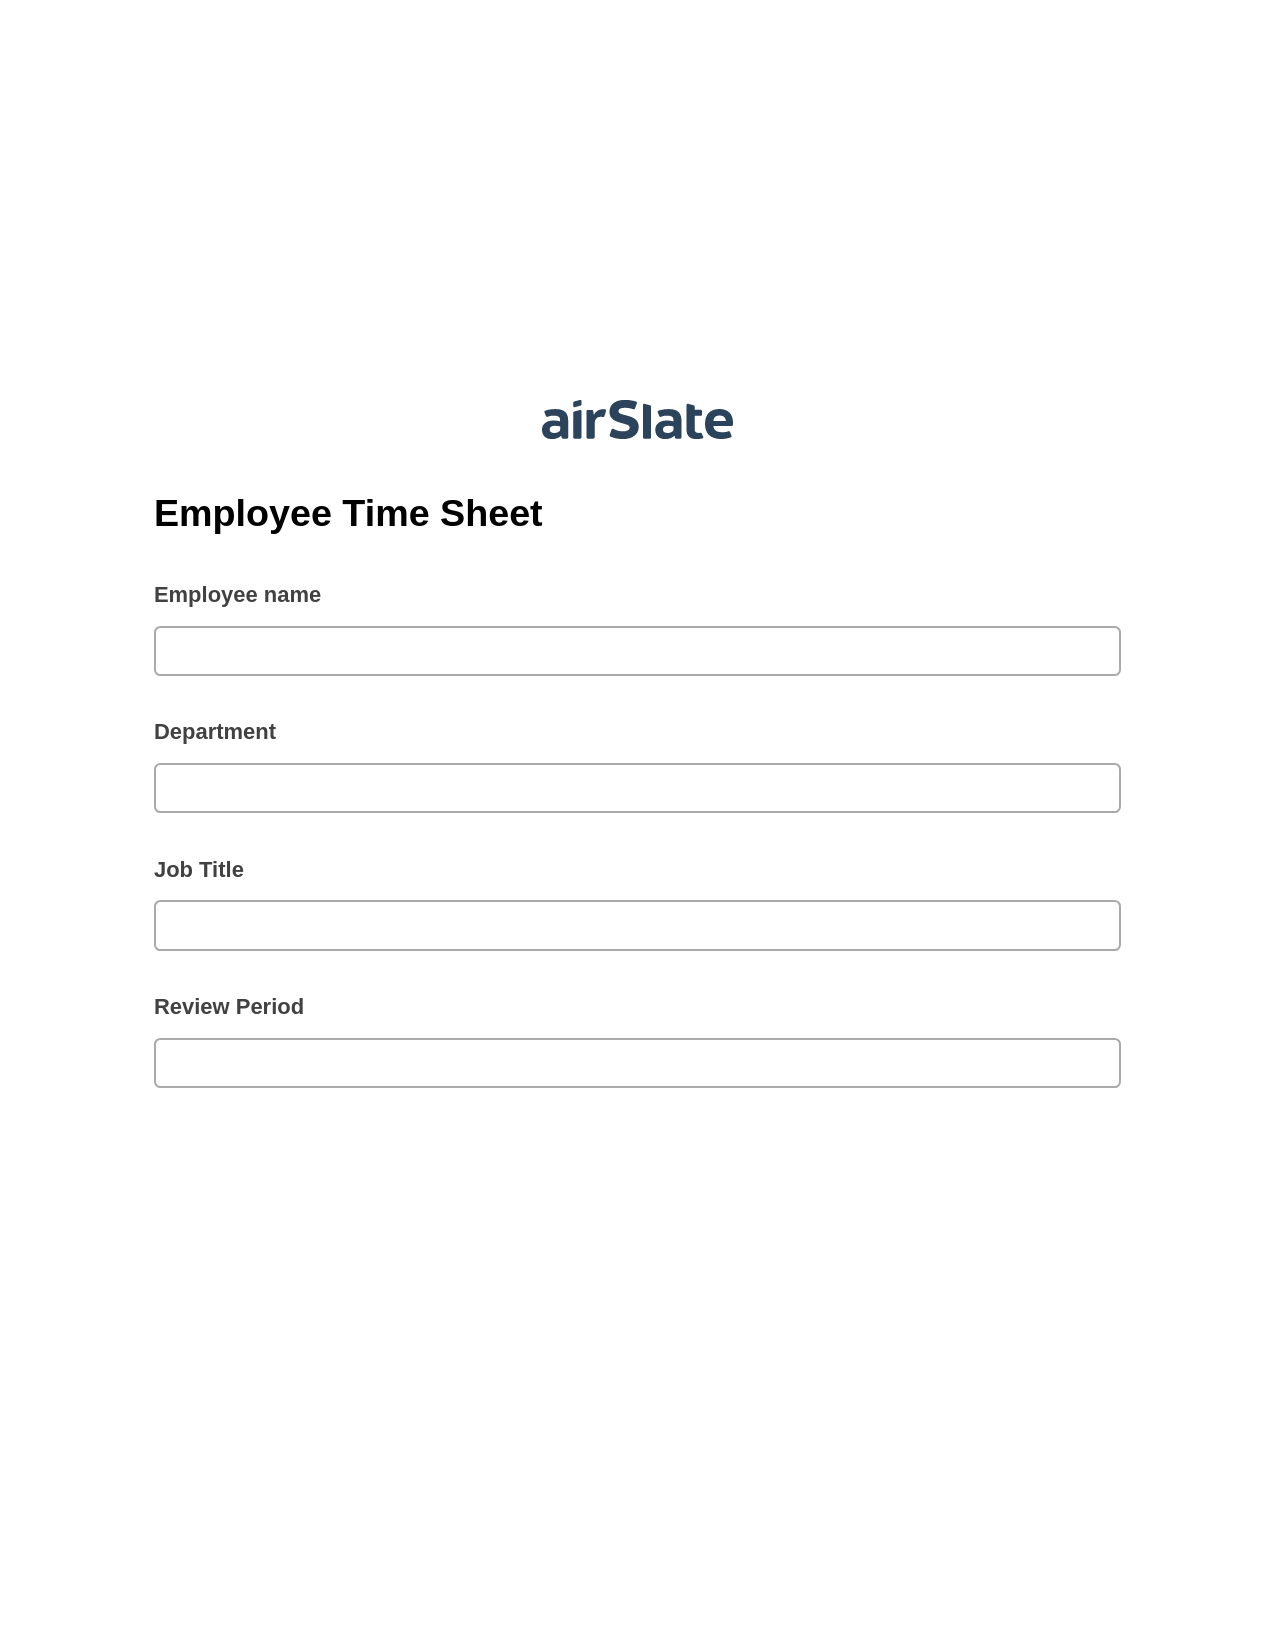 Employee Time Sheet Pre-fill from MS Dynamics 365 Records, Update Audit Trail Bot, Slack Two-Way Binding Bot